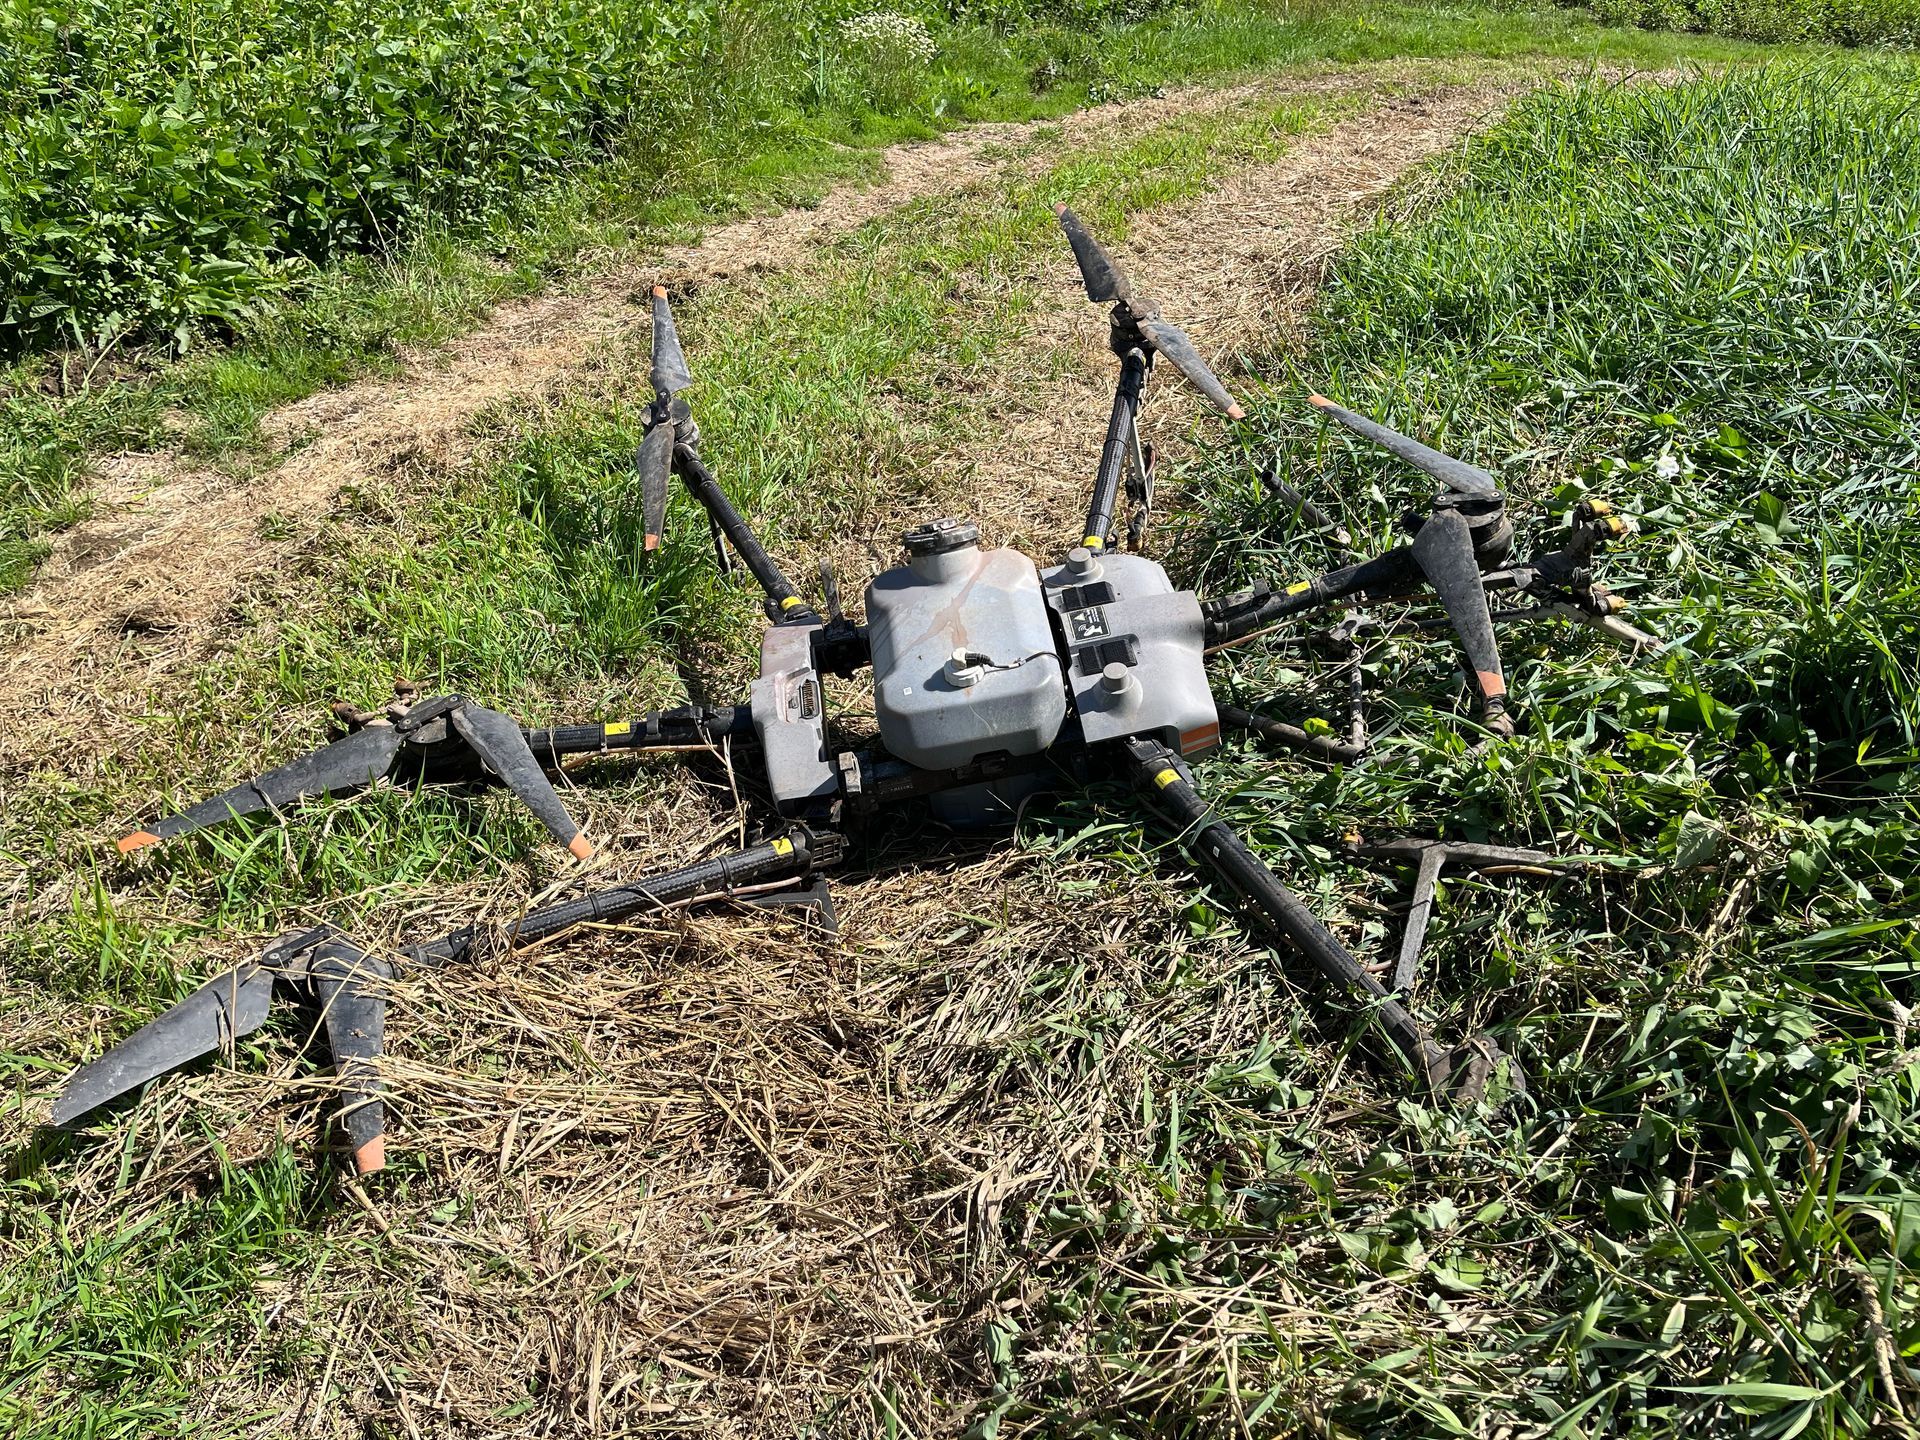 Drone crashed in a field